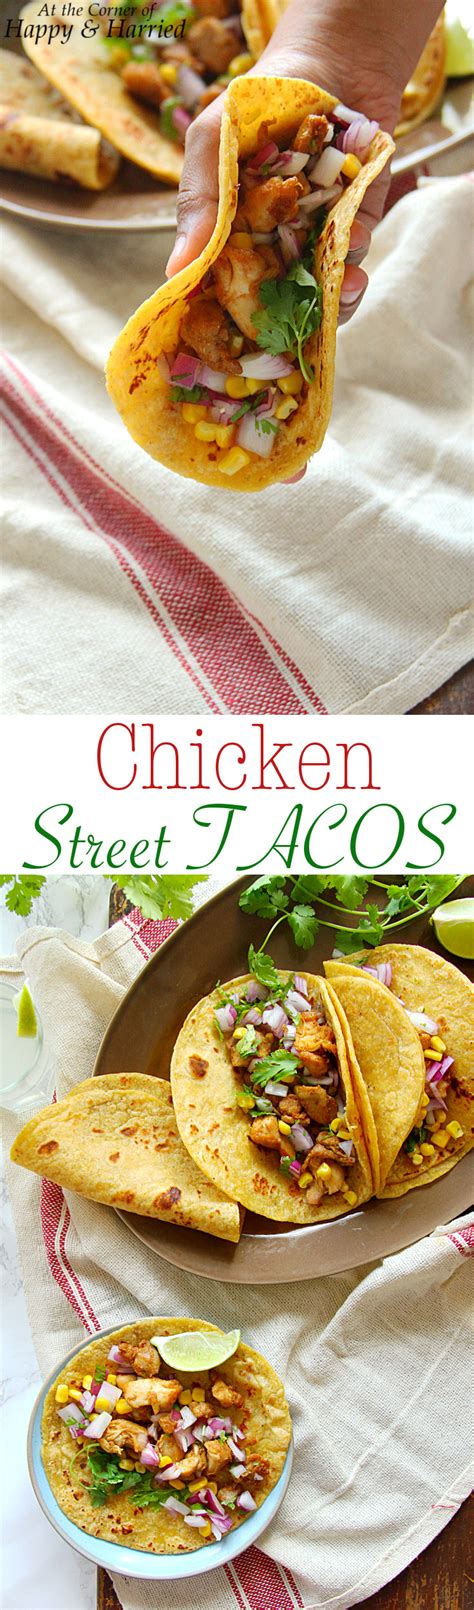 Amazingly flavorful mexican shredded chicken along with sour cream,cheese wrapped in warm tortilla makes this the best mexican street chicken tacos you know of.learn to make very easy one pot shredded mexican chicken along with rest of the ingredients topped with shredded cheese makes these street tacos the. Mexican Chicken Street Tacos